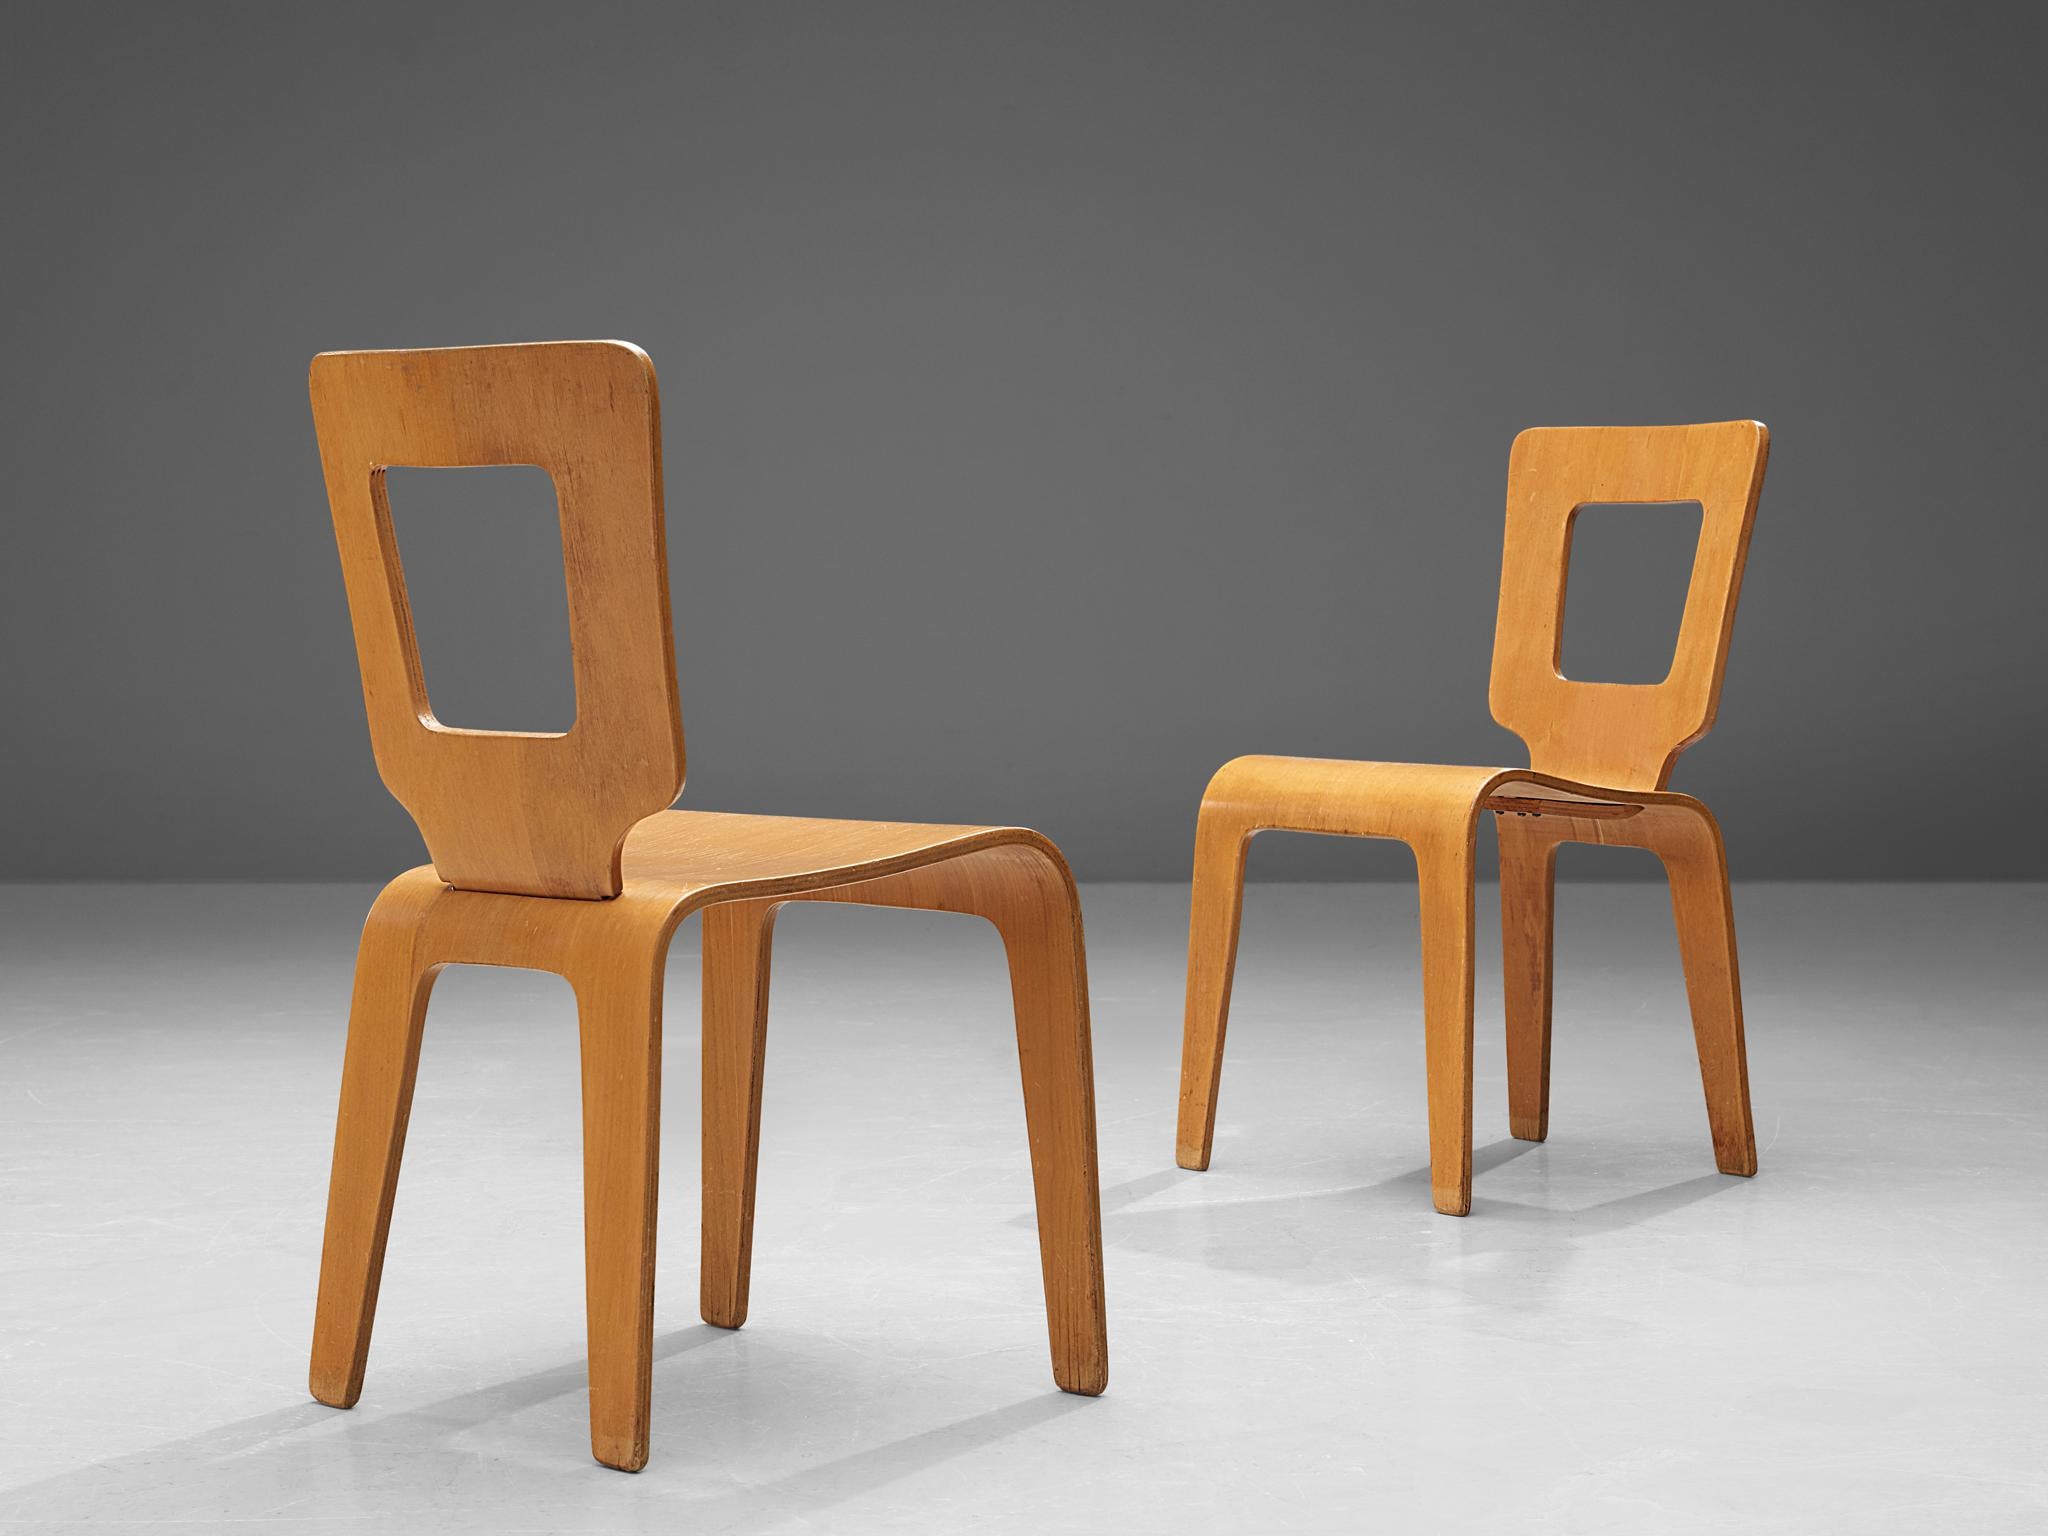 Herbert von Jordan for Thaden-Jordan Furniture Corporation, dining chairs, side chairs, plywood, United States, 1940s-1950s.

A pair of molded plywood side chairs by Herbert Von Jordan. He used building methods during the period of the 1940s that